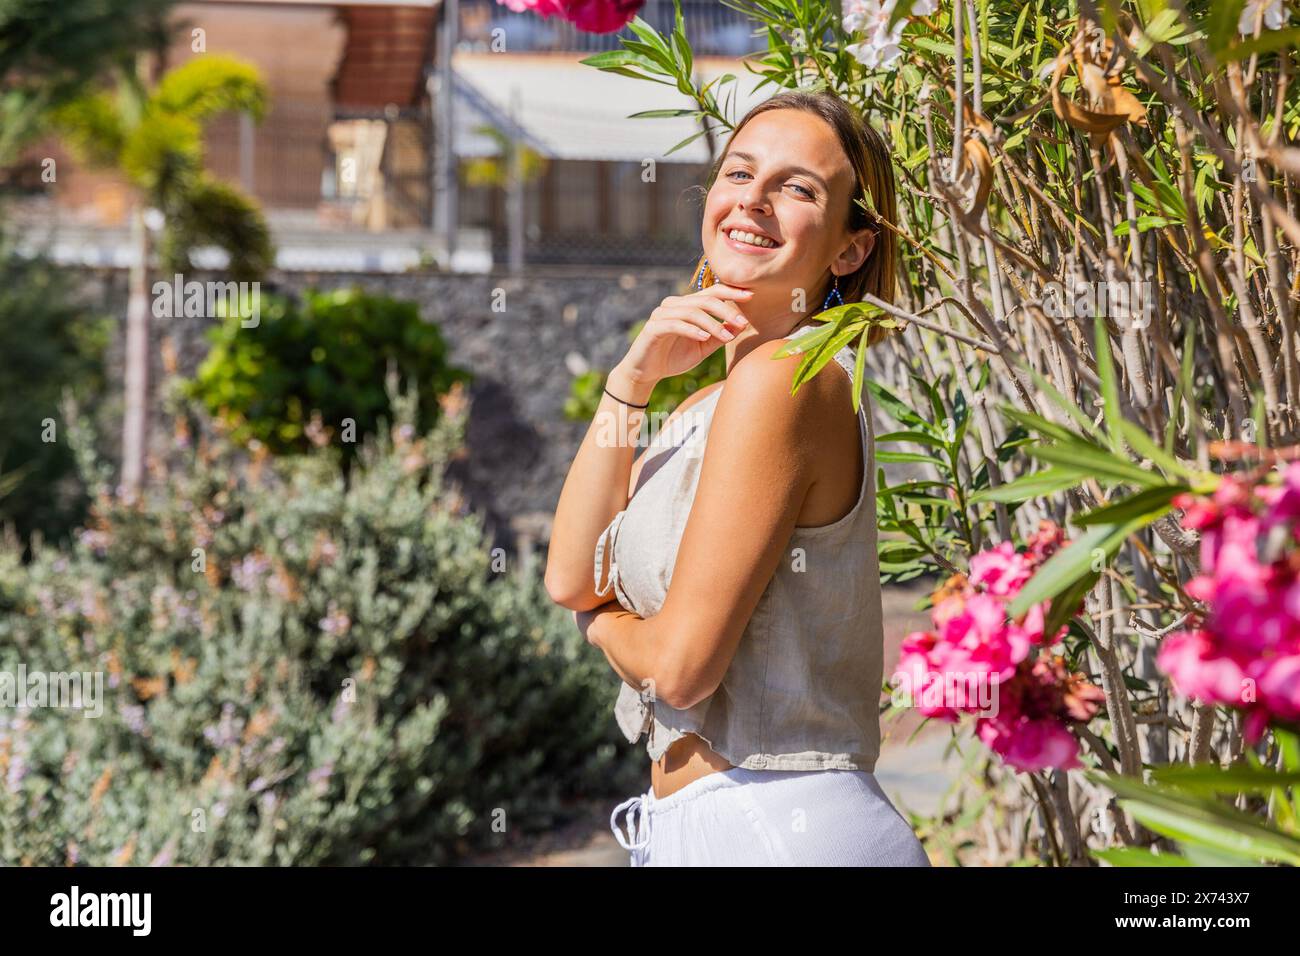 A woman is standing in front of a wall with pink flowers. She is smiling and looking at the camera Stock Photo